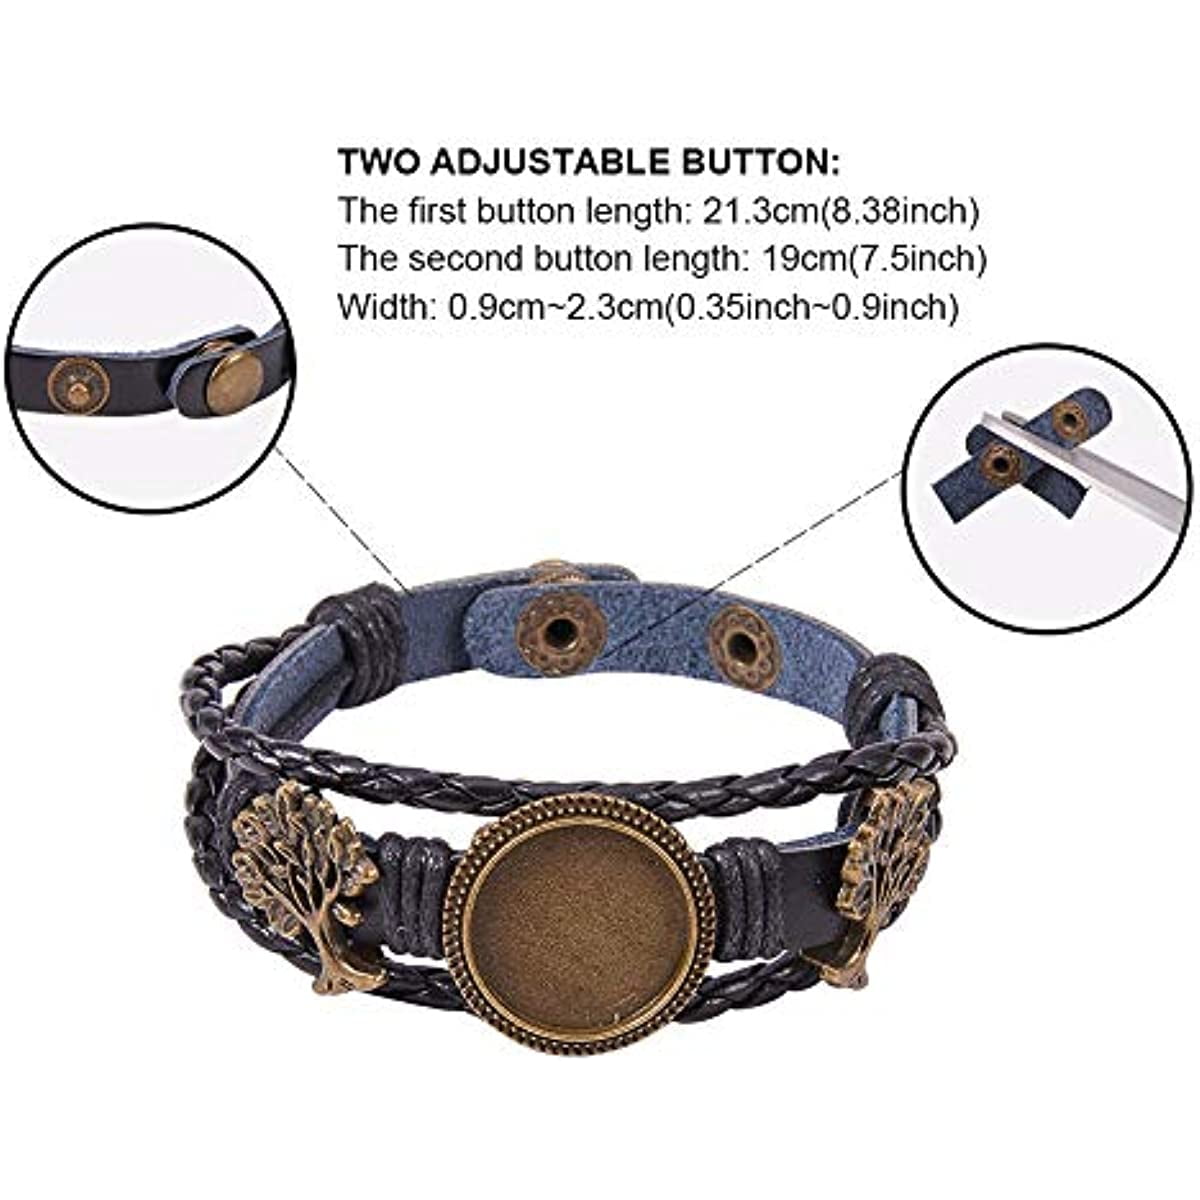 Wholesale Leather Bracelet Bezel Setting With Aluminum Tally Sheet Ideal  For DIY Crafts And Sublimation Heat Transfer From Belkin, $0.71